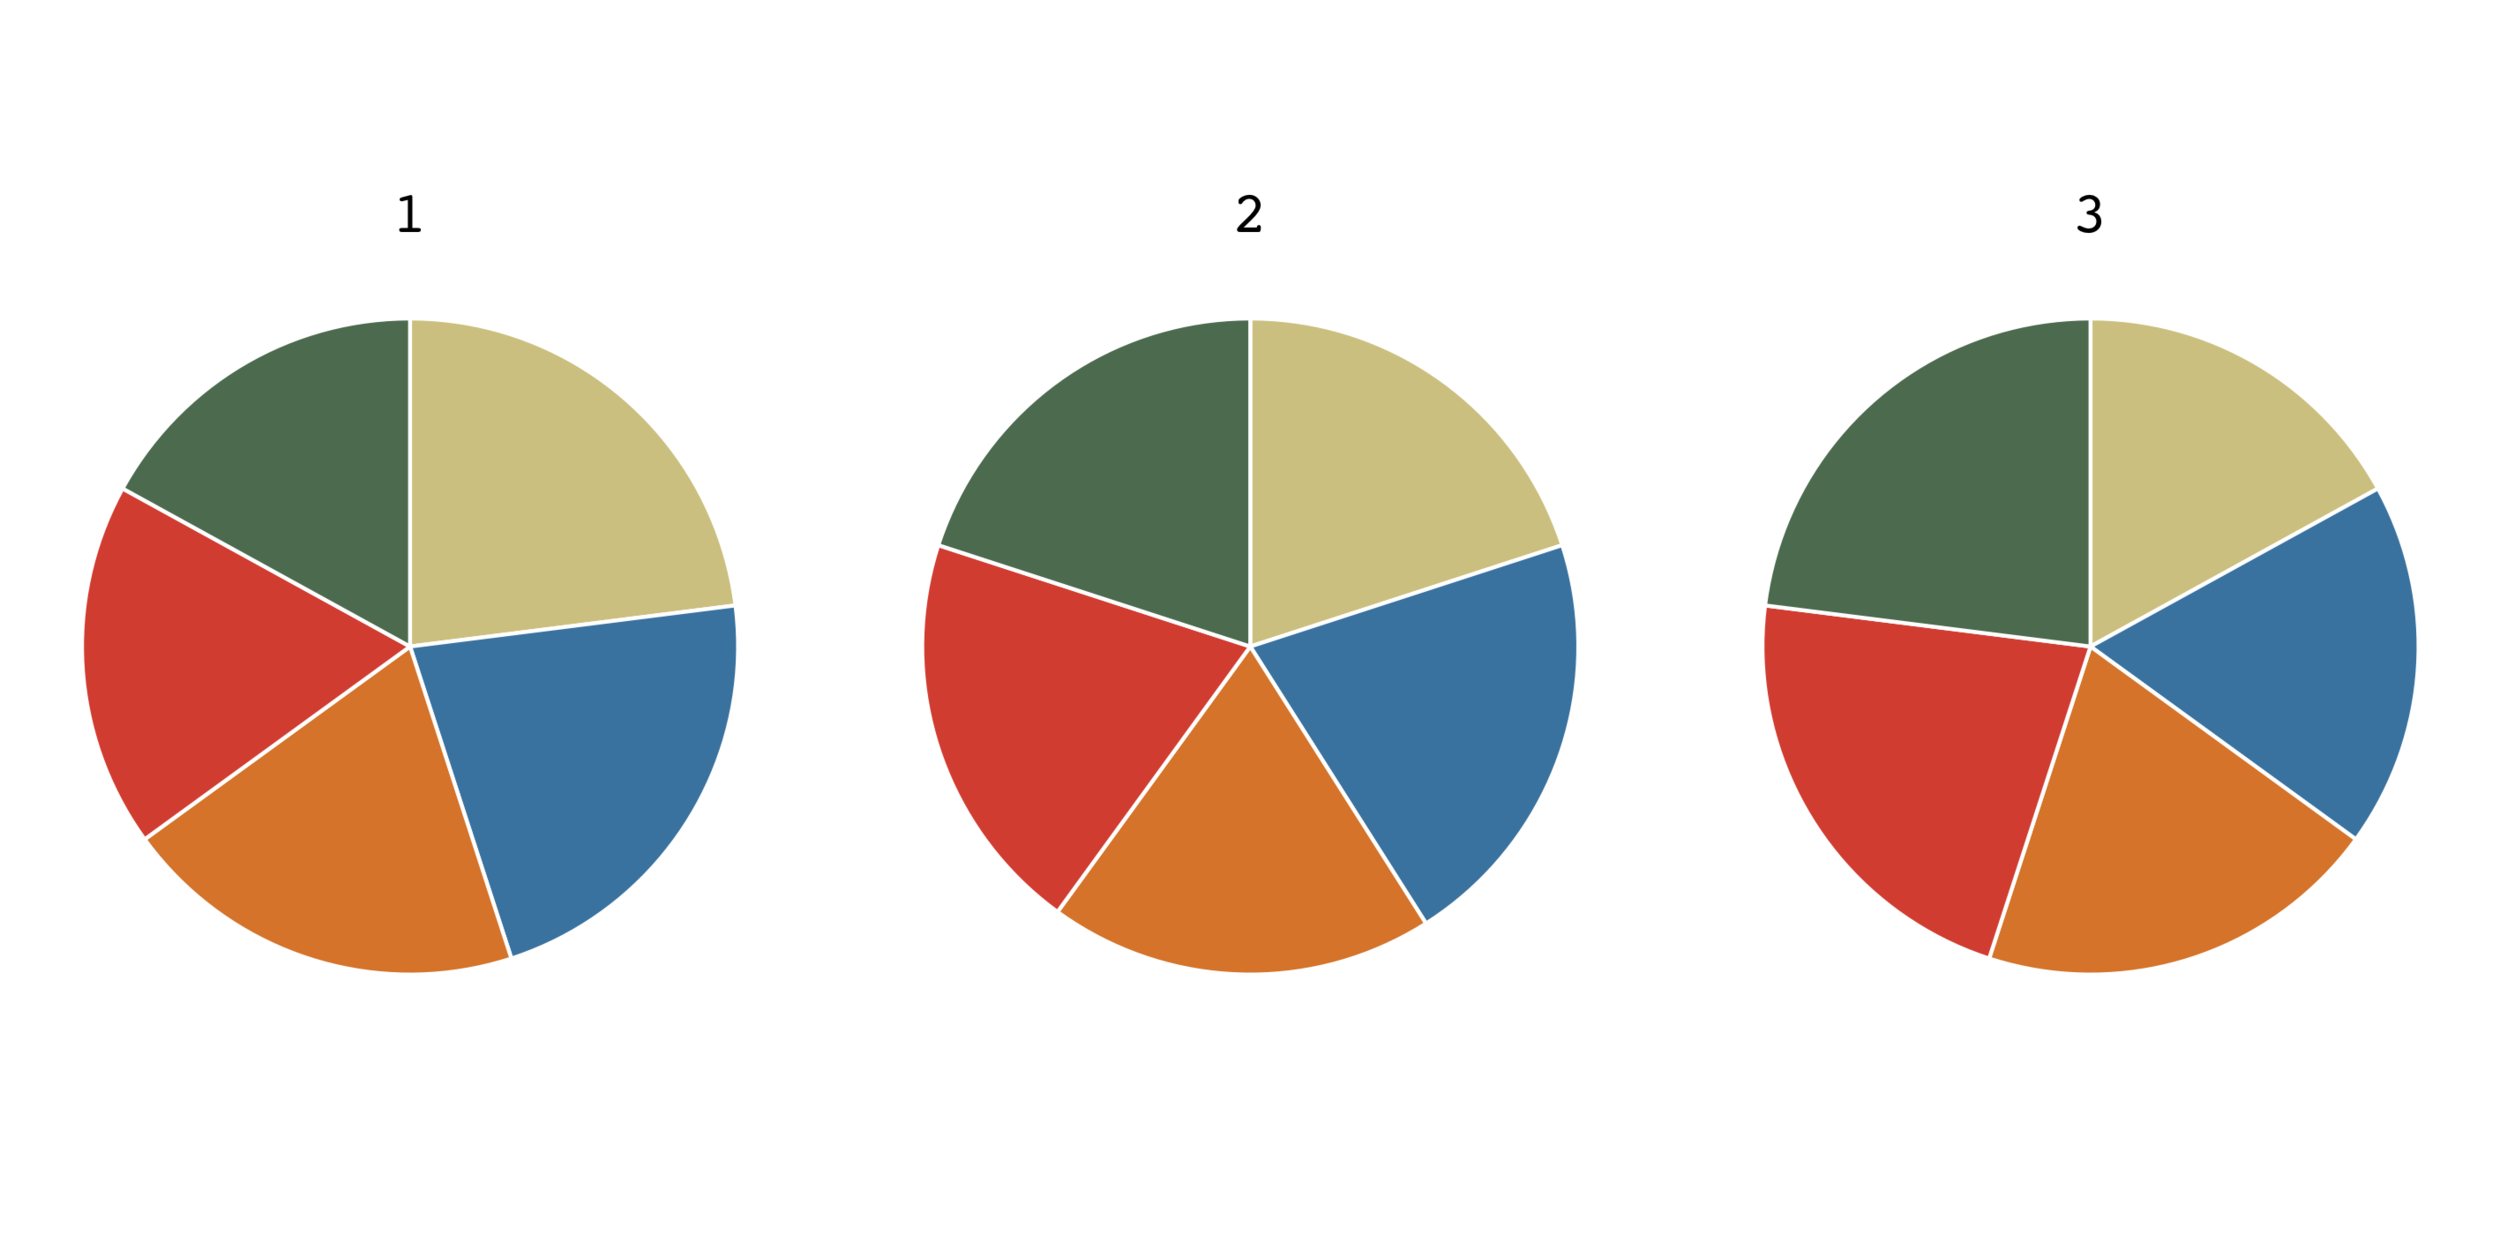 A series of 3 pie charts, each with 5 slices with different colours. There are clearly differences between the 3 pies, but identifying the biggest and smalles slice of each pie is difficult